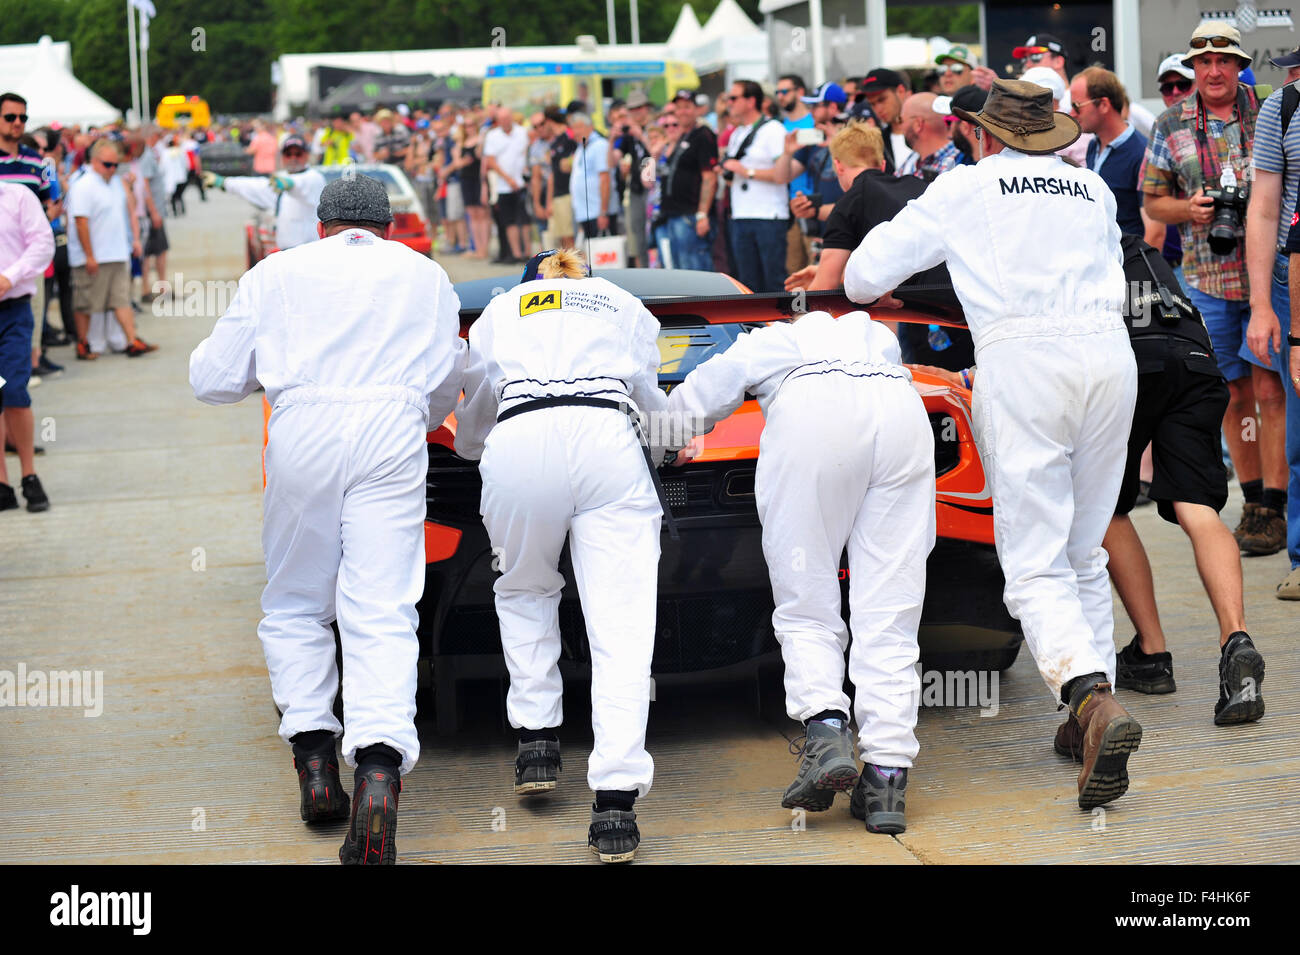 Marshals push a racing car past crowds at the Goodwood Festival of Speed in the UK. Stock Photo